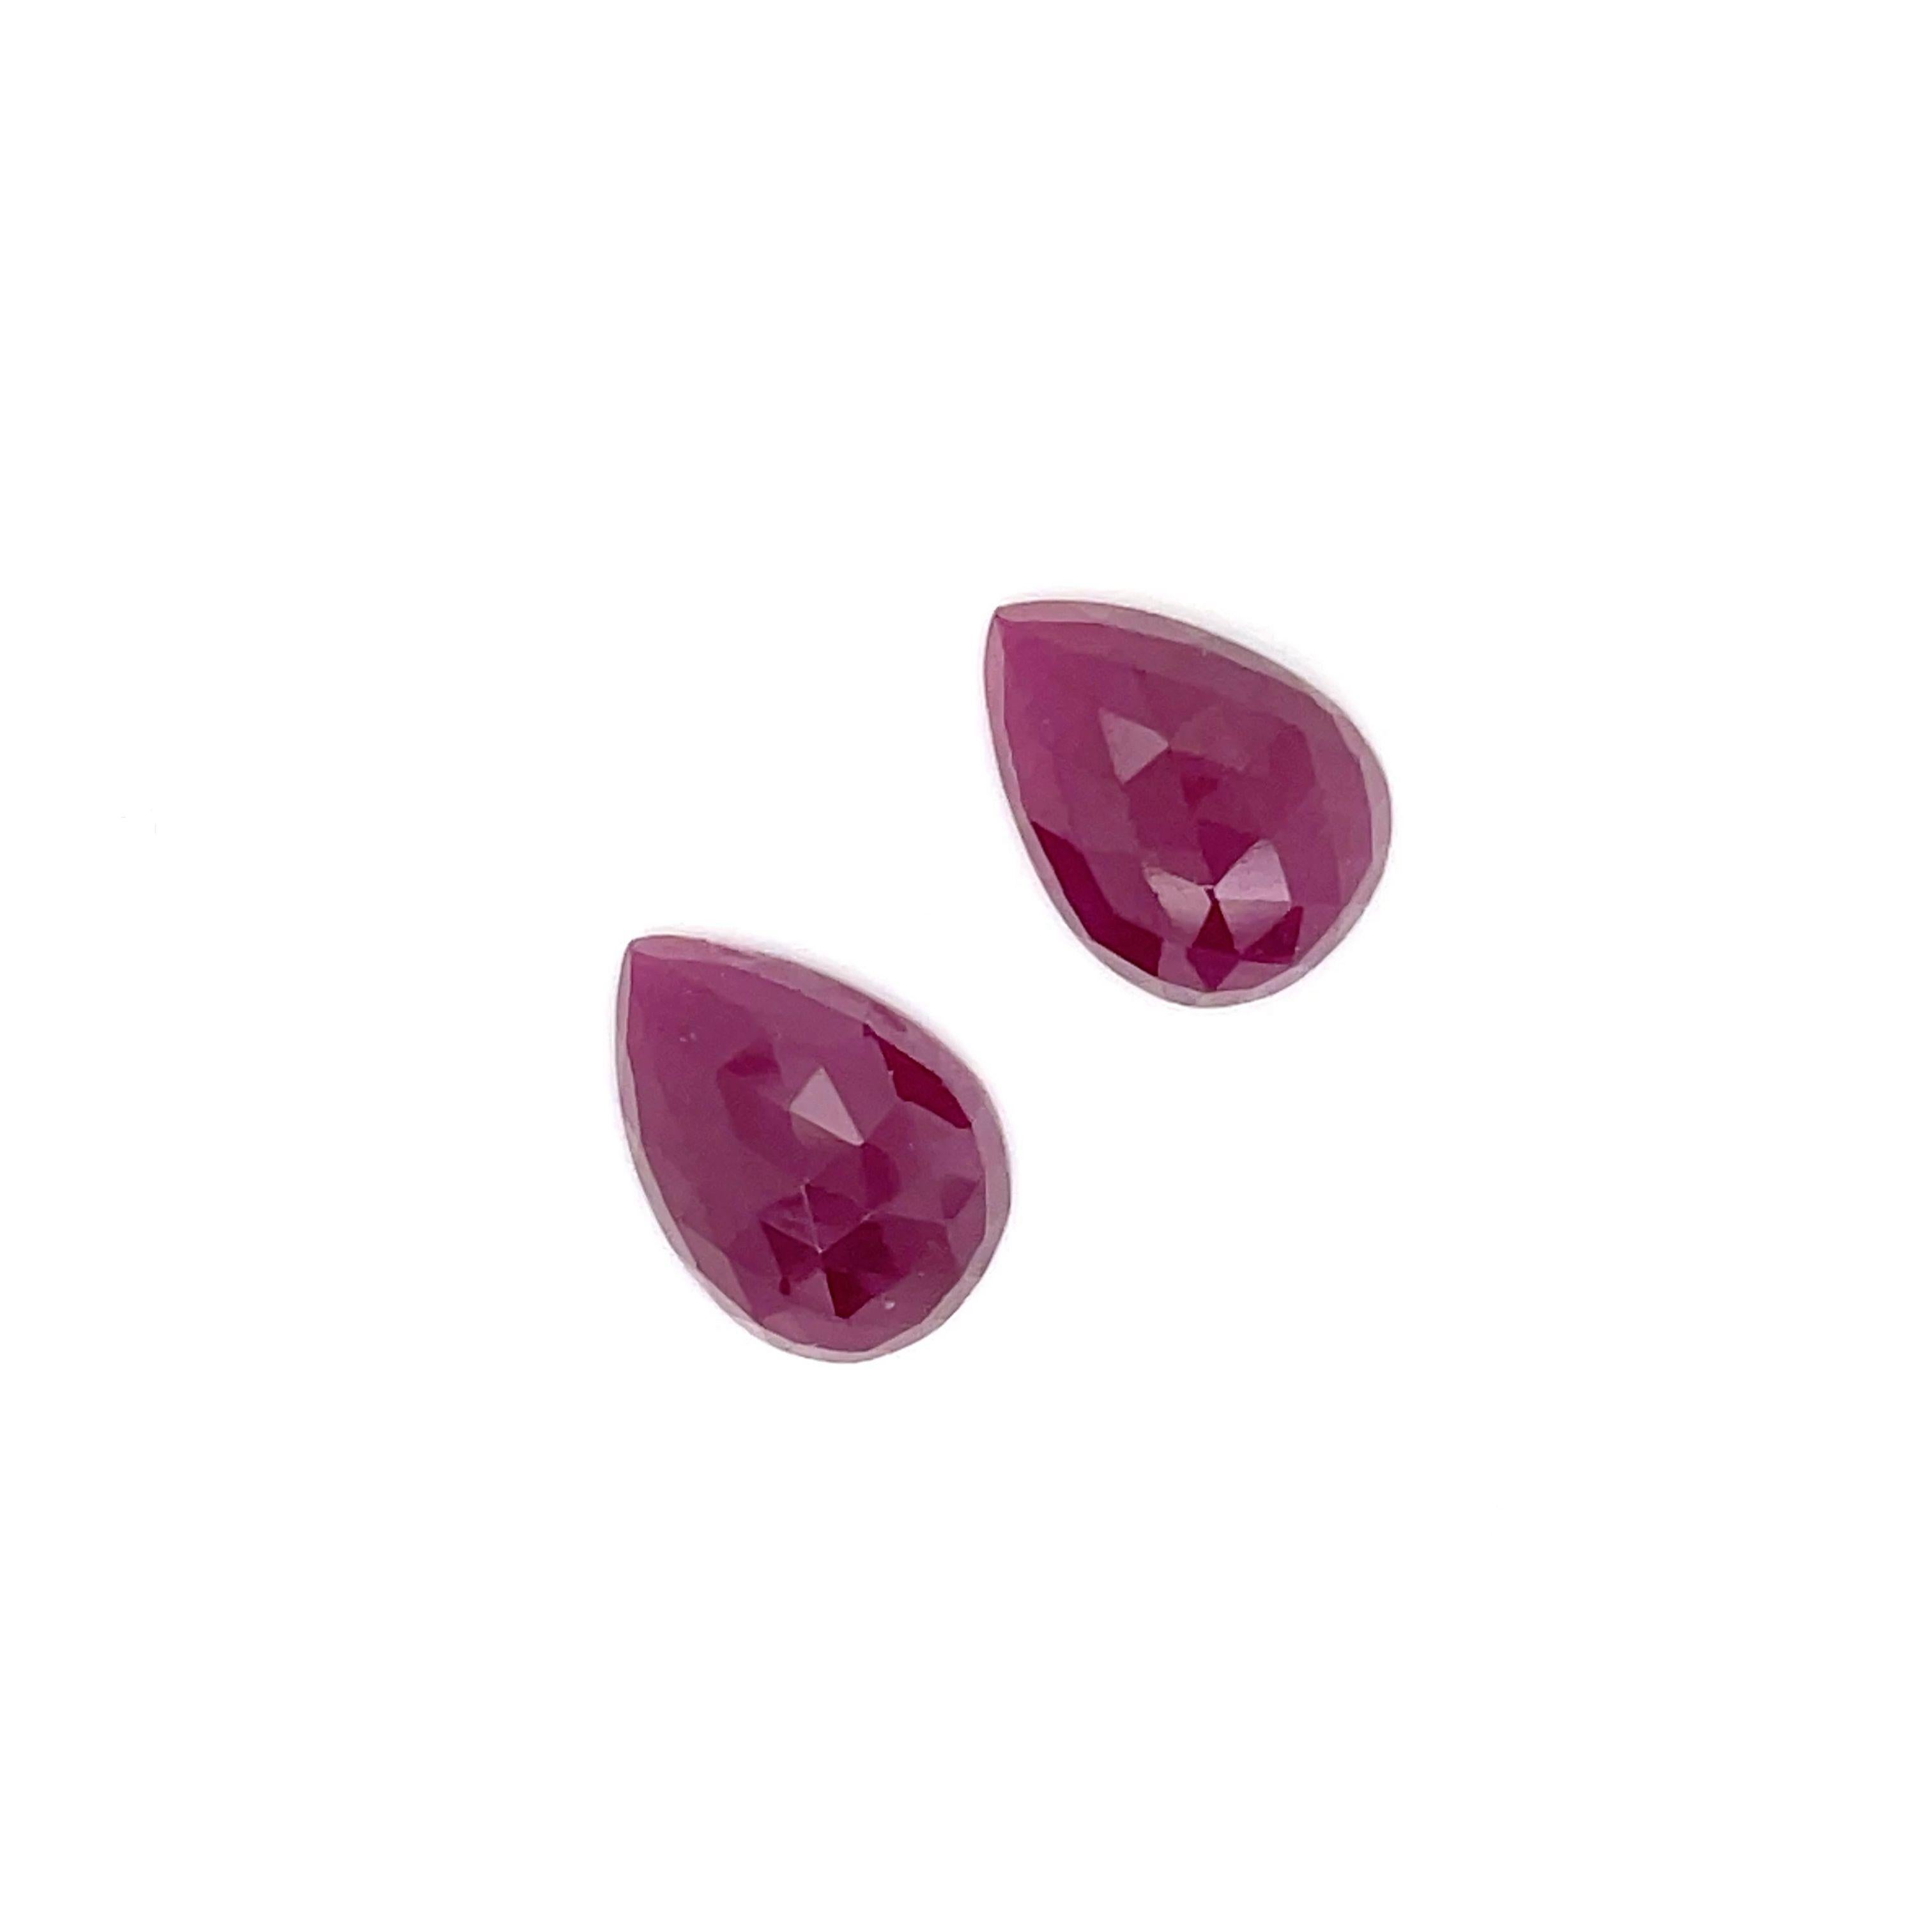 Pear Cut No Heat 2 Indian Pear-Shaped Buff Rubies Cts 20.22 For Sale